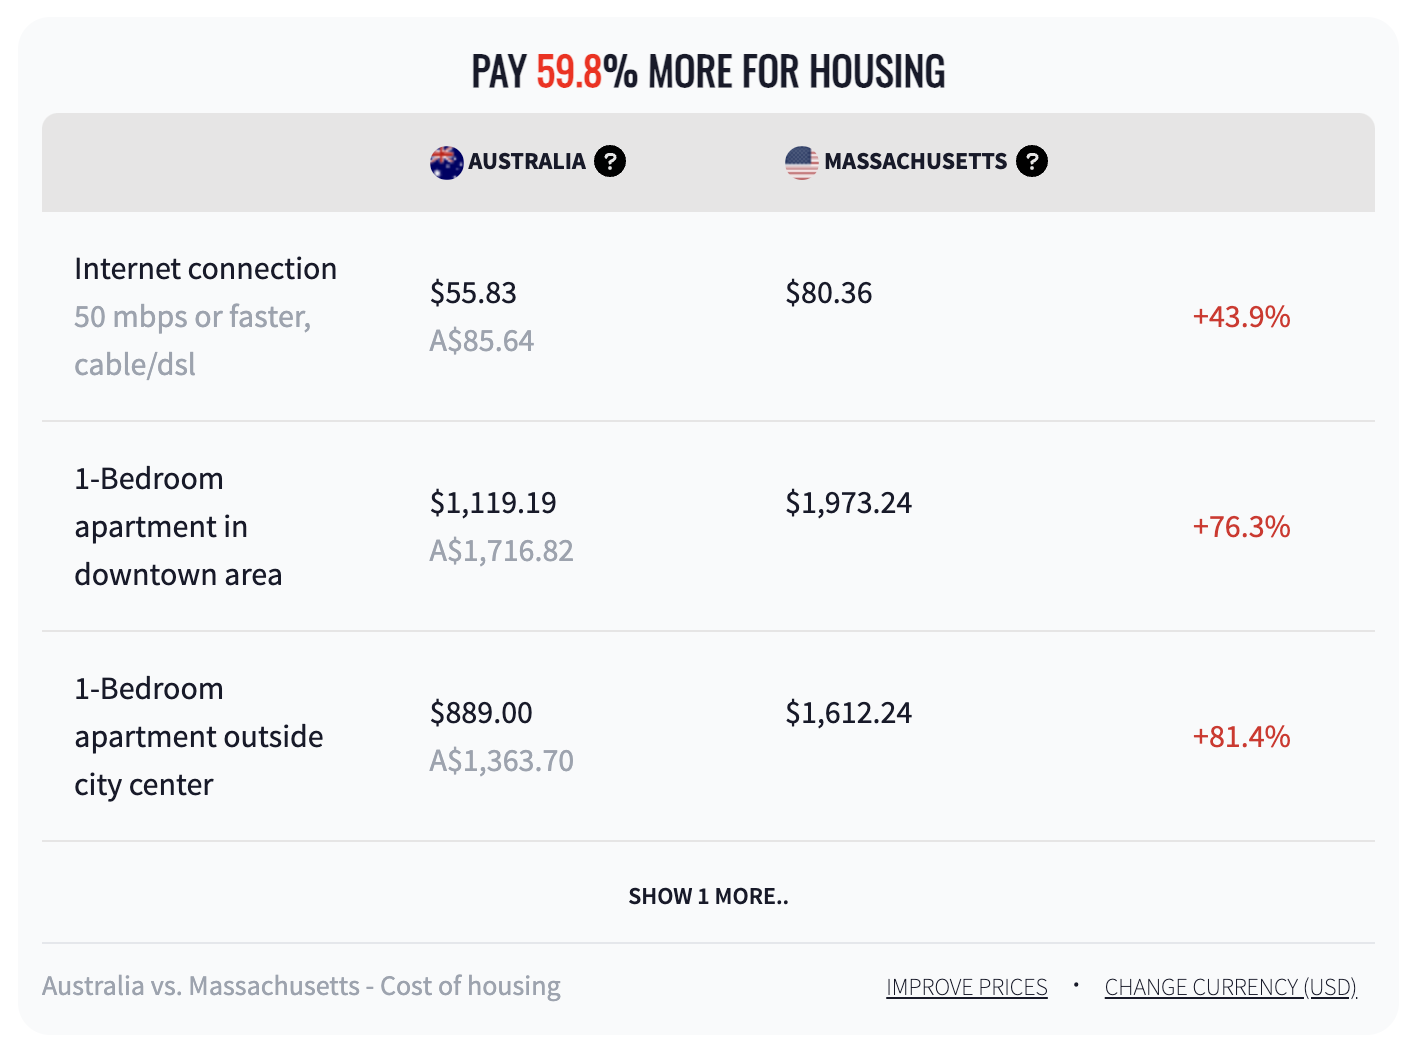 Pay 59.8% more for housing